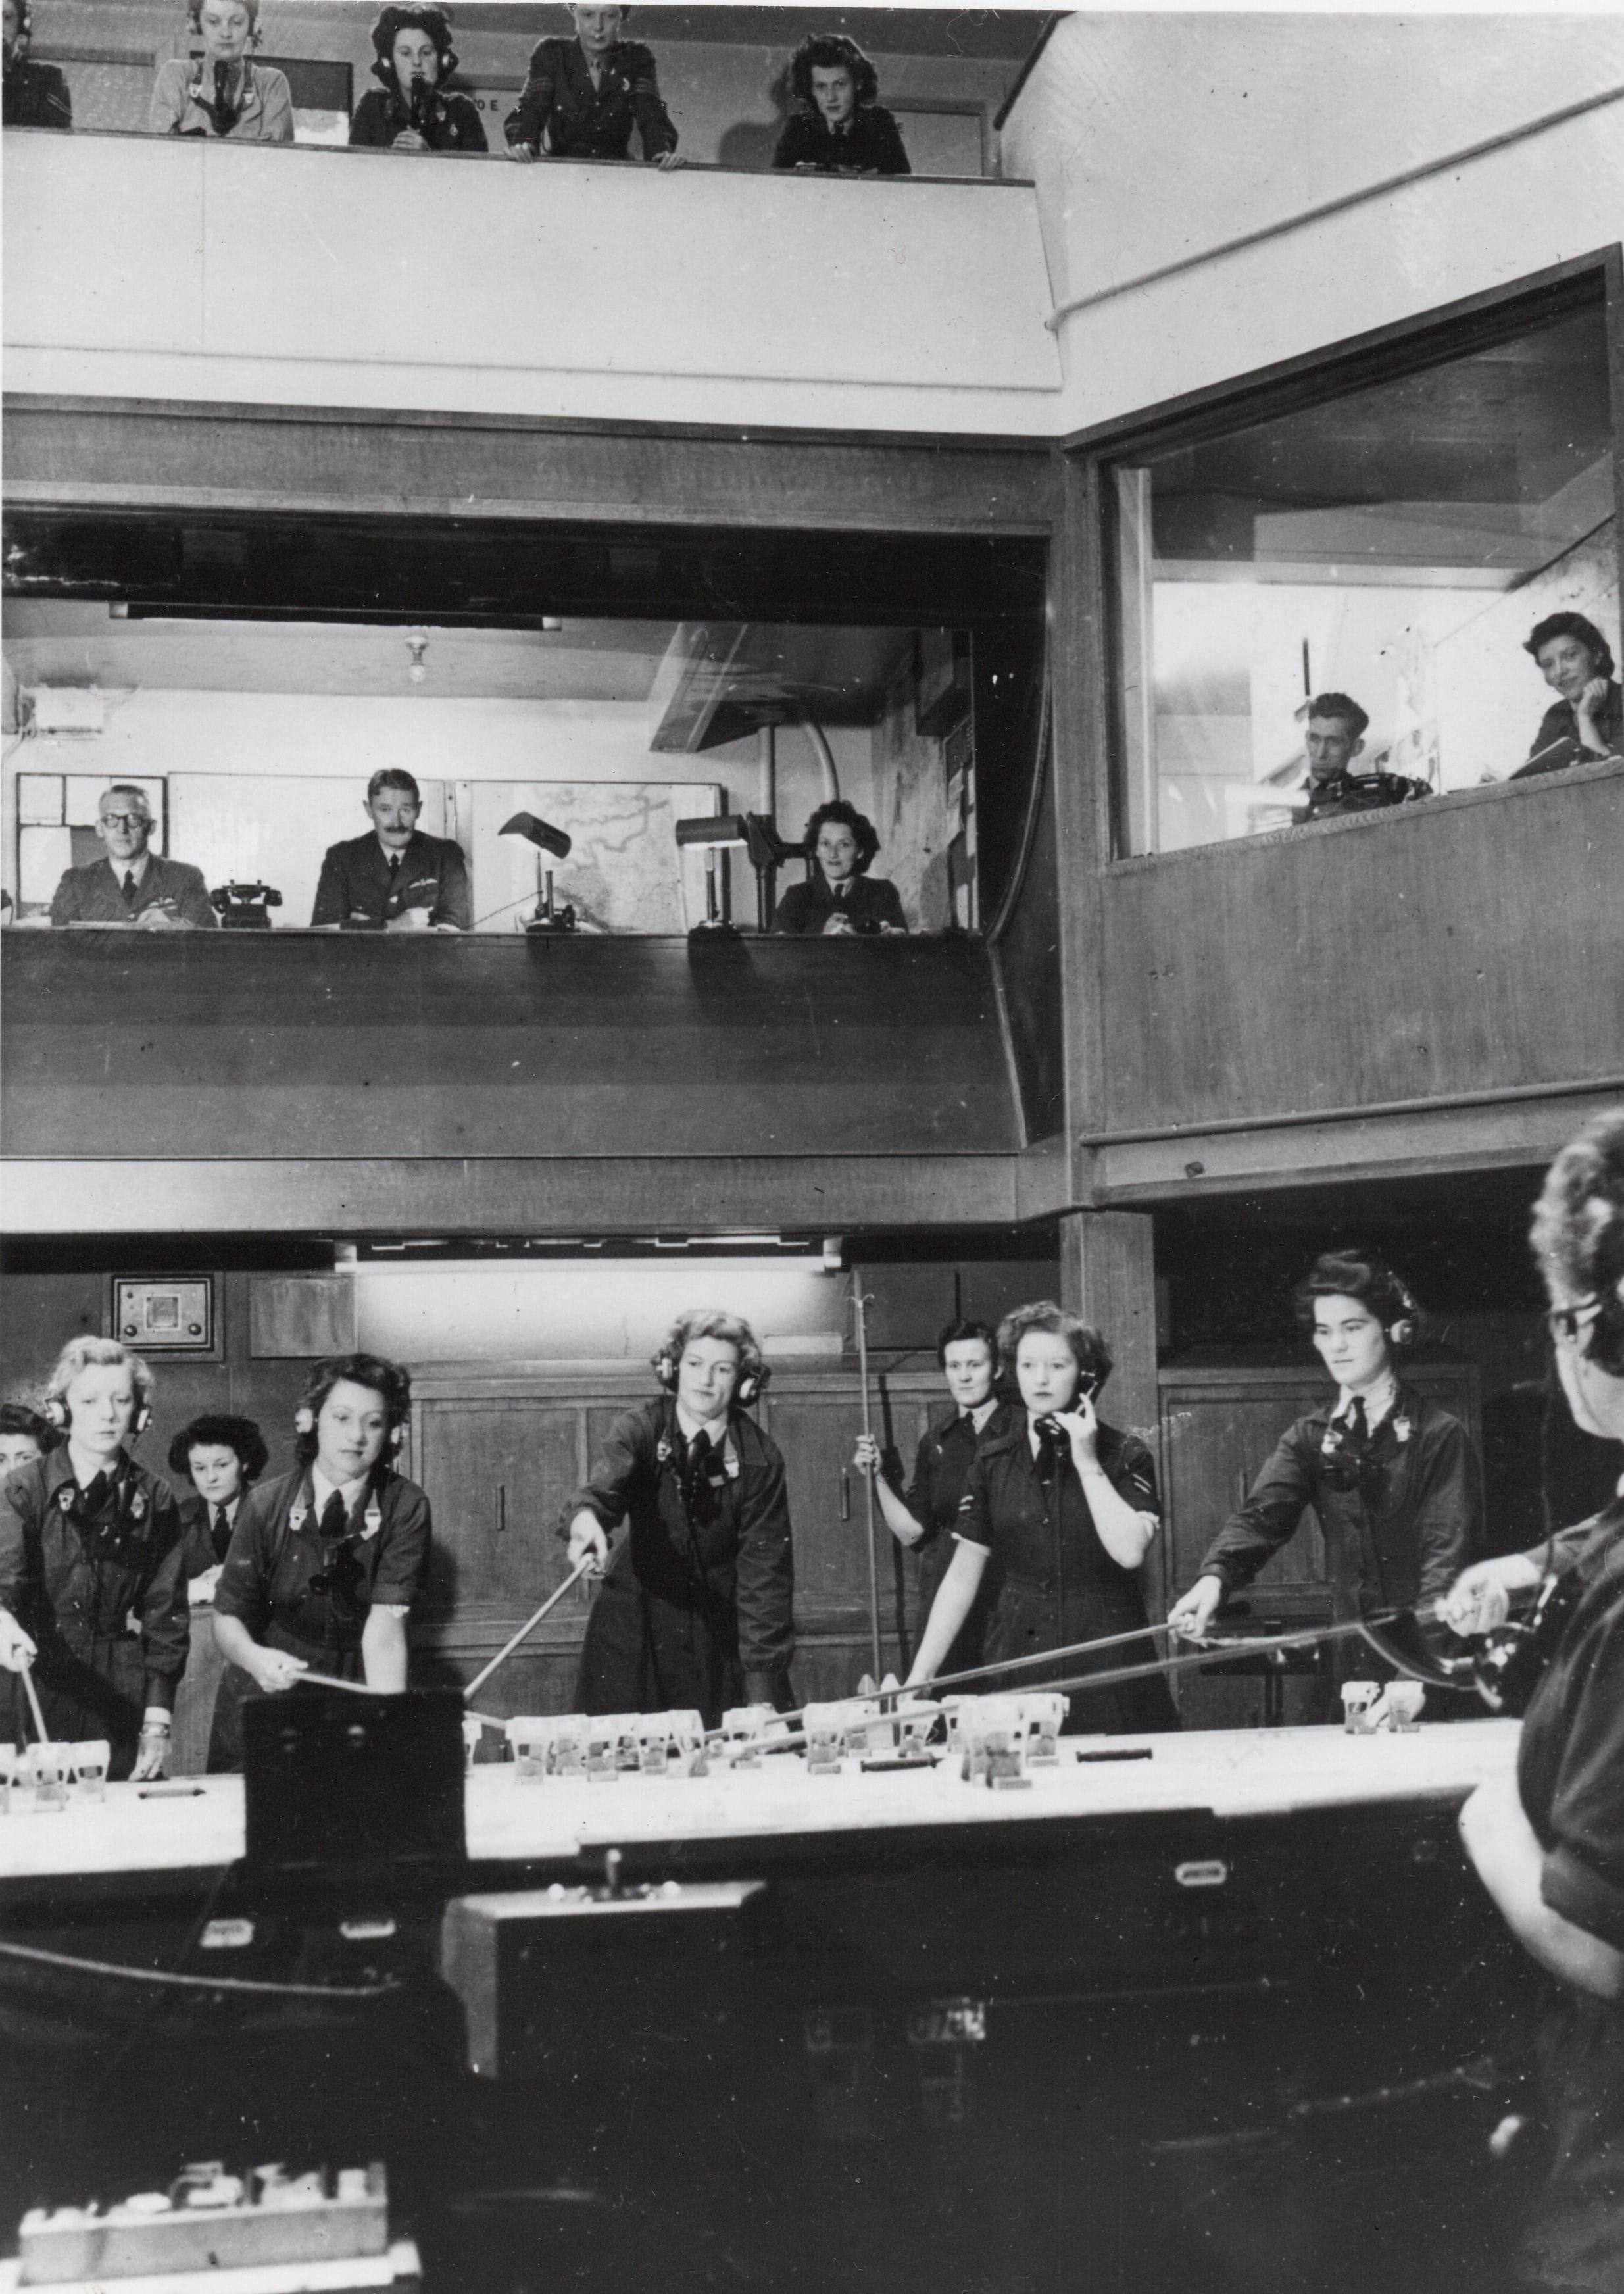 Battle of Britain: The Royal Air Force and Women's Auxiliary Air Force working together in an operations room  (copyright: Chris Goss)